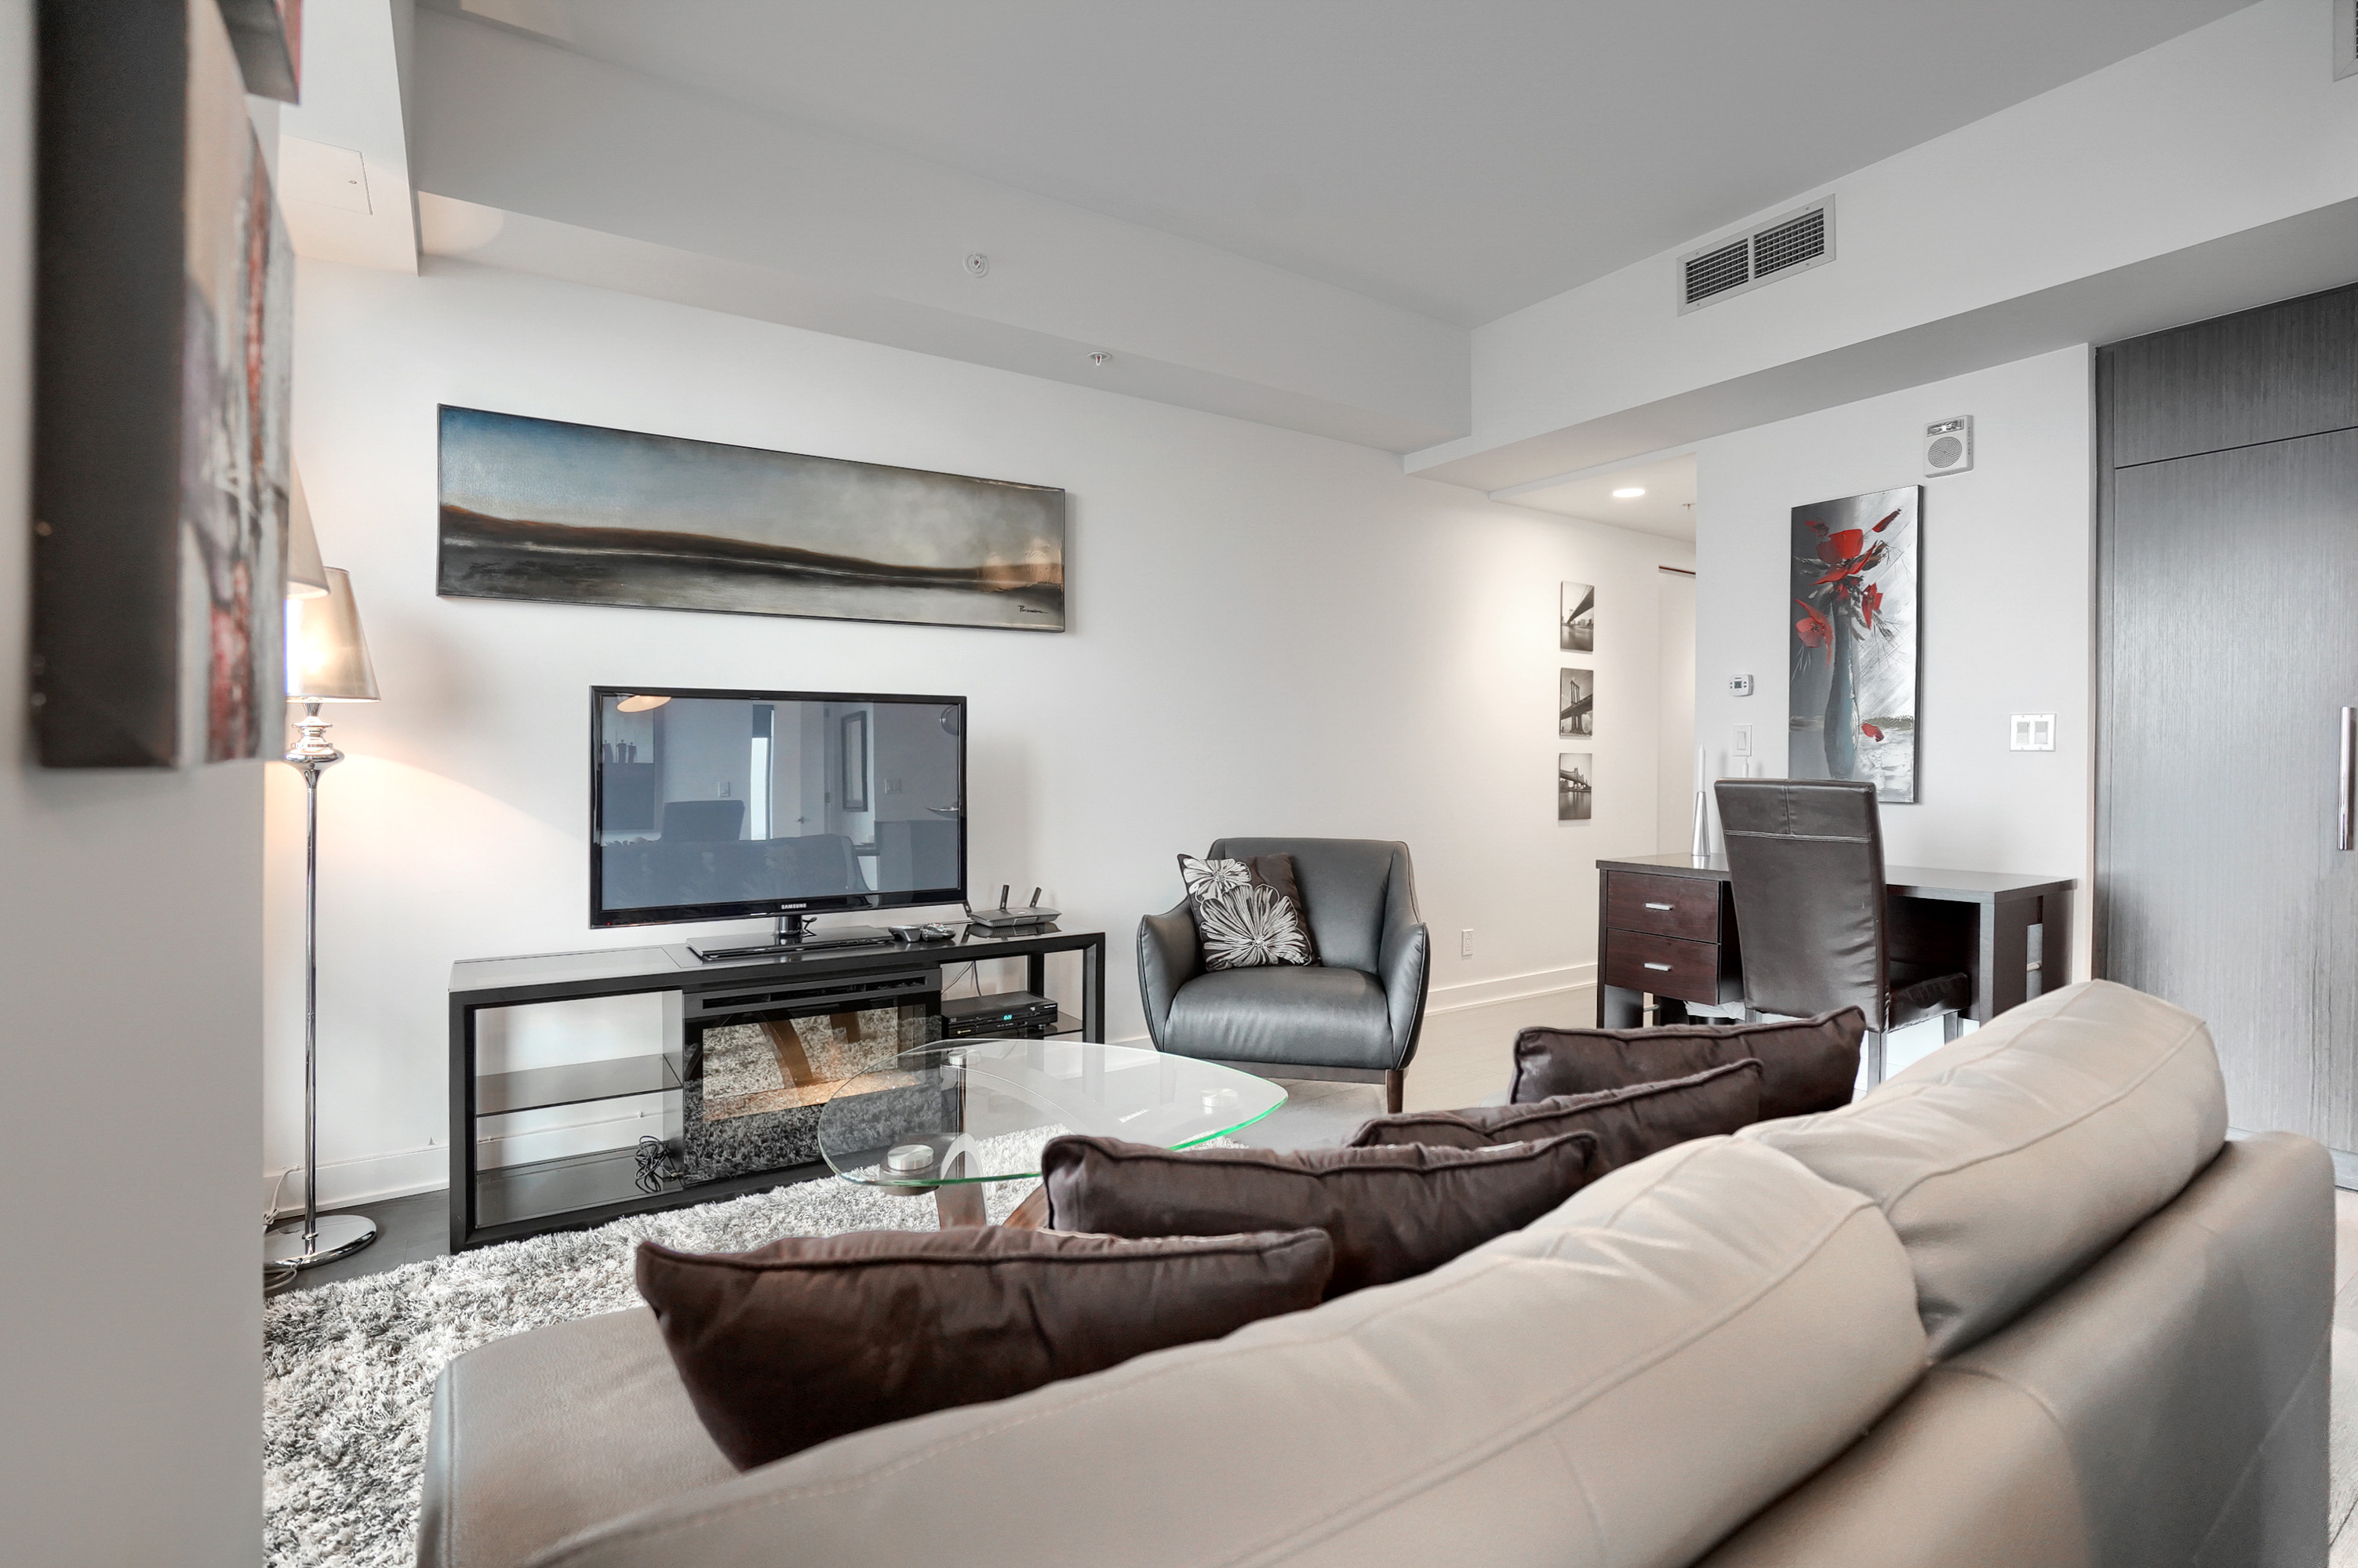 View from the dining area into the living room of this furnished rental in montreal. Gray leather couch & over-sized chair. Flat screen TV, glass table on top of a fluffy rug. Floor-to-ceiling window to the left and study desk with chair to the right. 